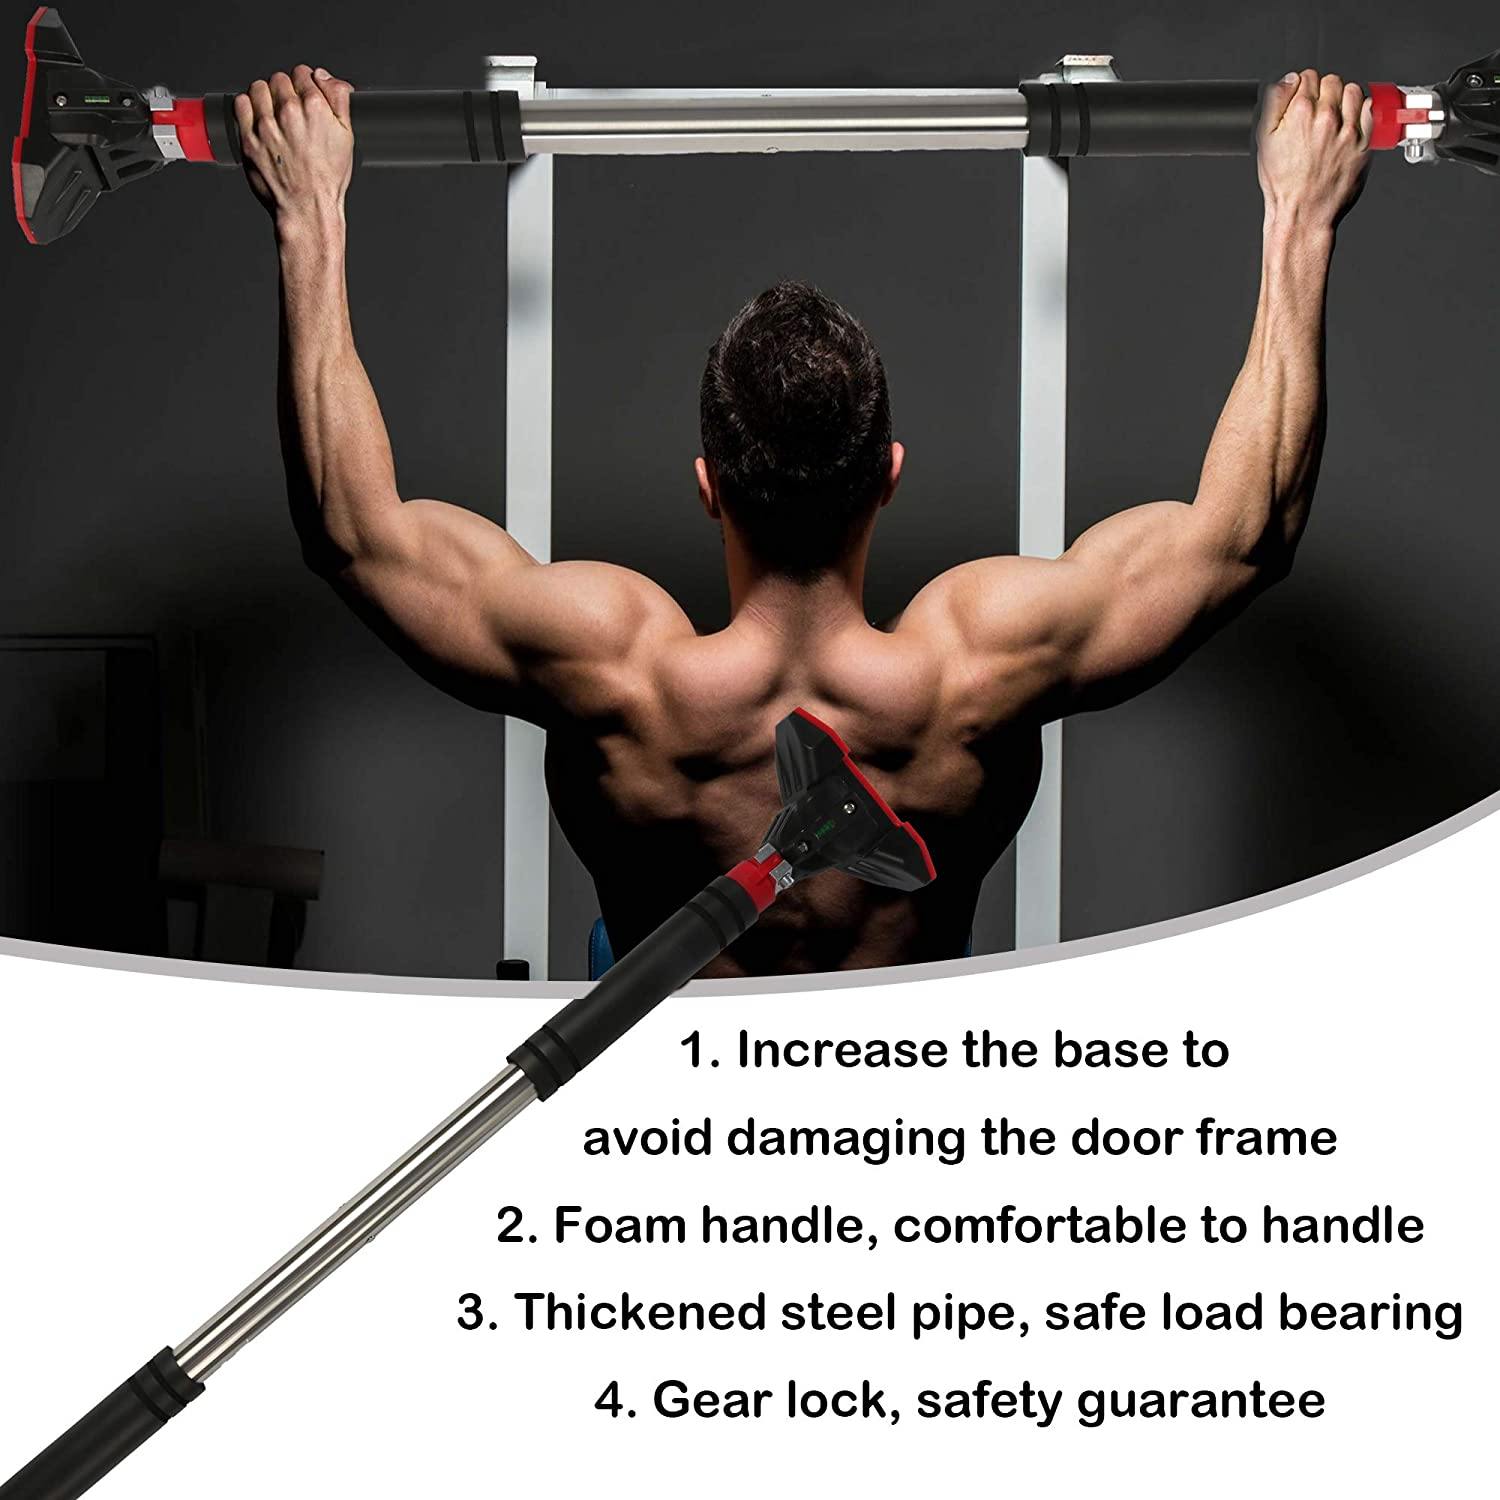 Doorway Pull up Bar Multifunctional Locking Chin Up Bar Adjustable Width Horizontal Bars on The Door Max Support 440LBS for Home Gym Exercise - Bosonshop